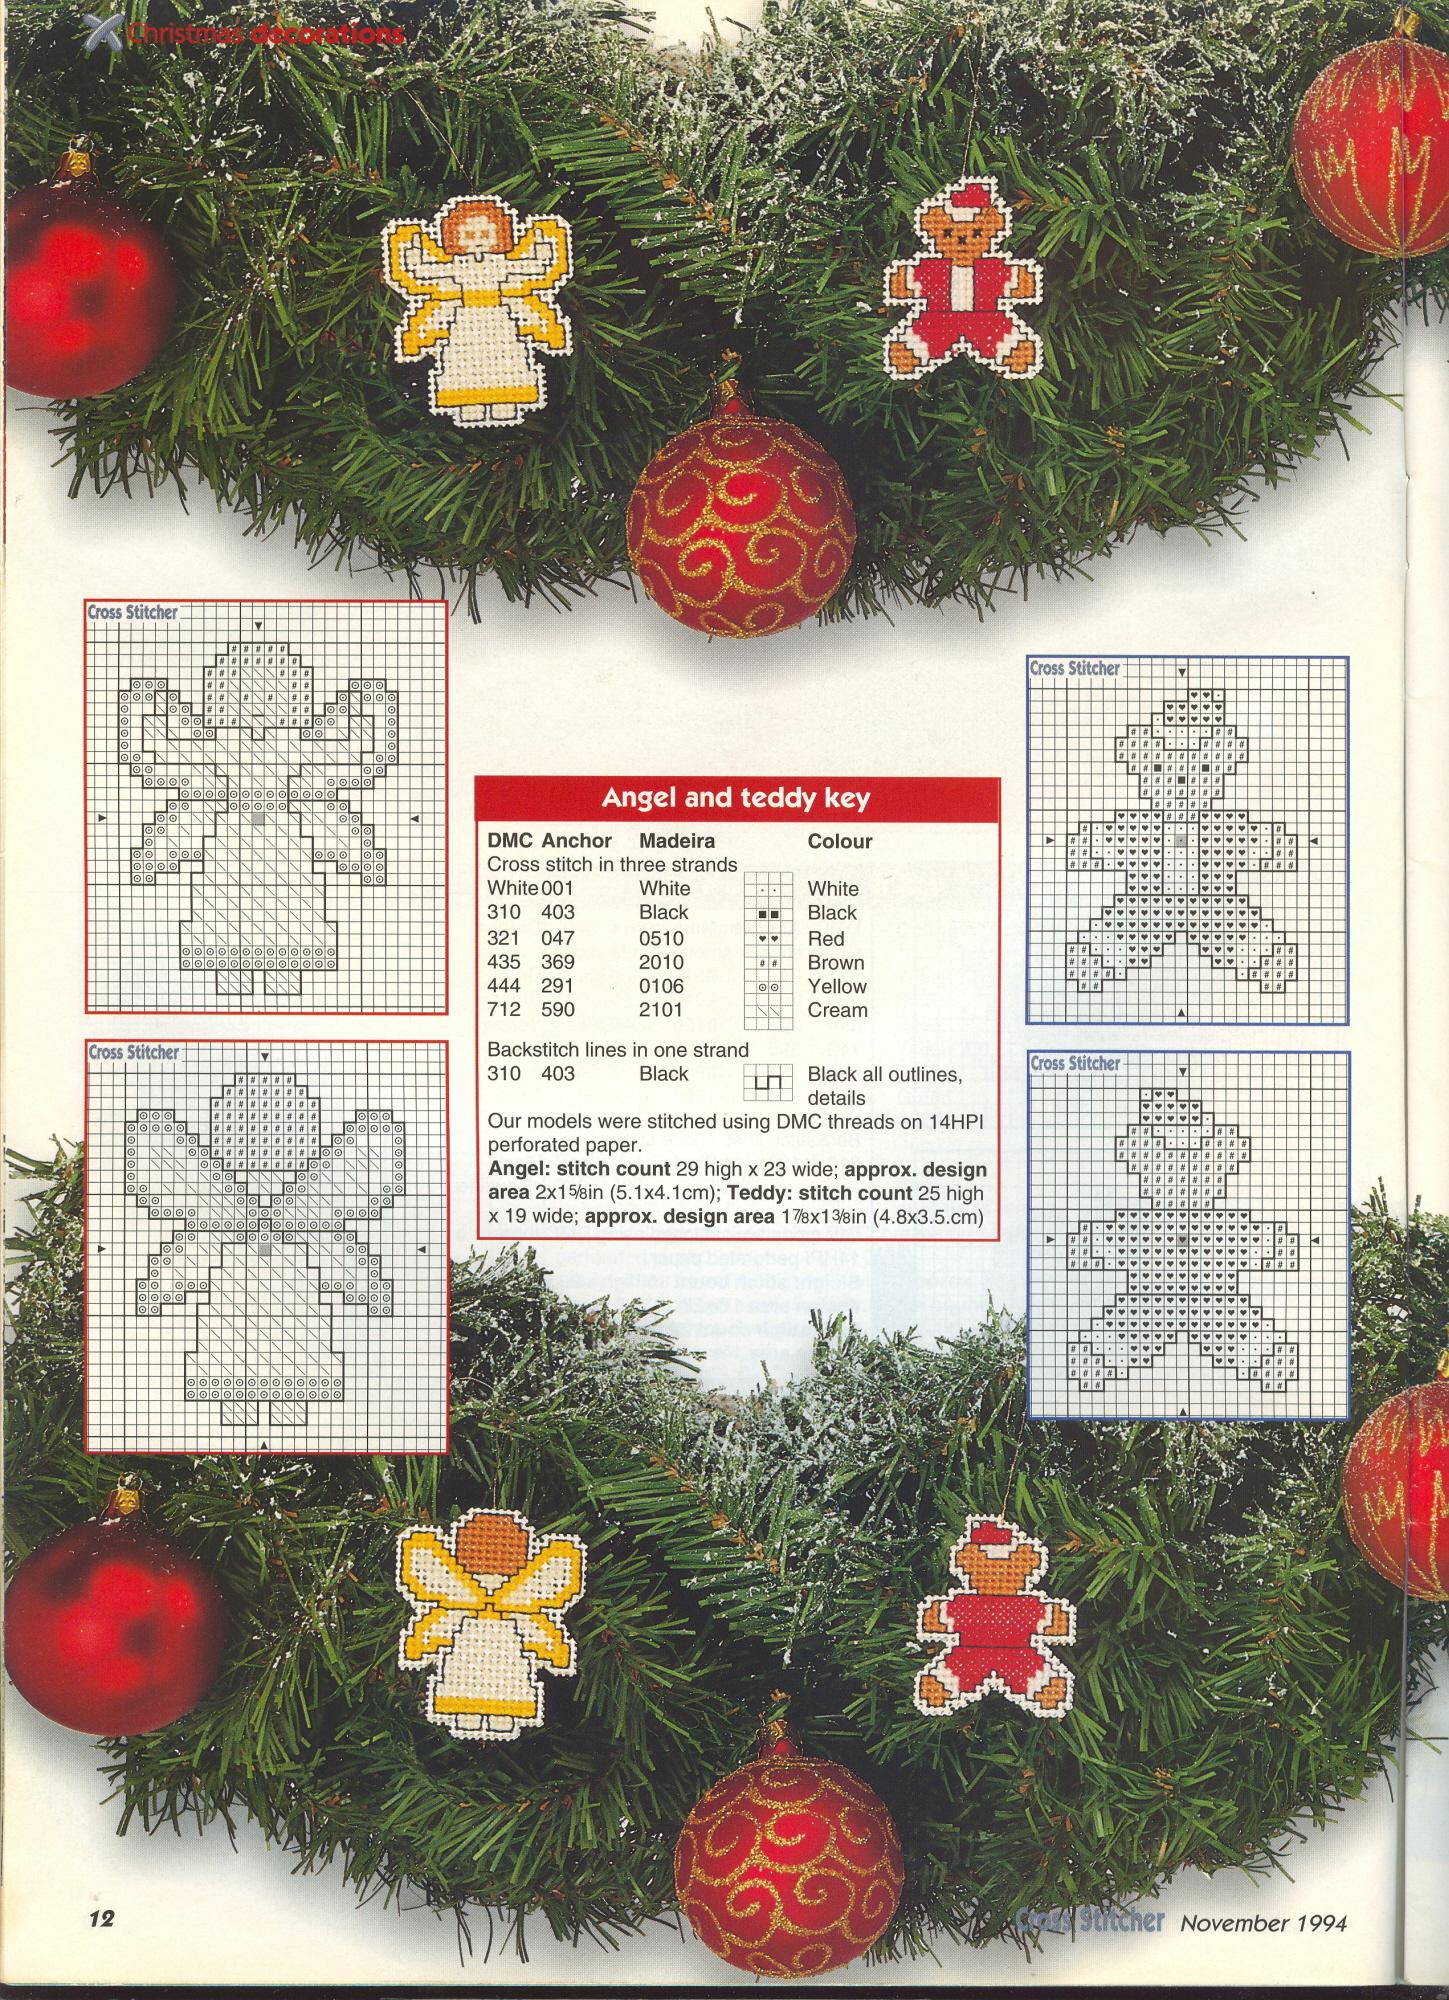 angels and teddy bears patterns to hang on the Christmas tree